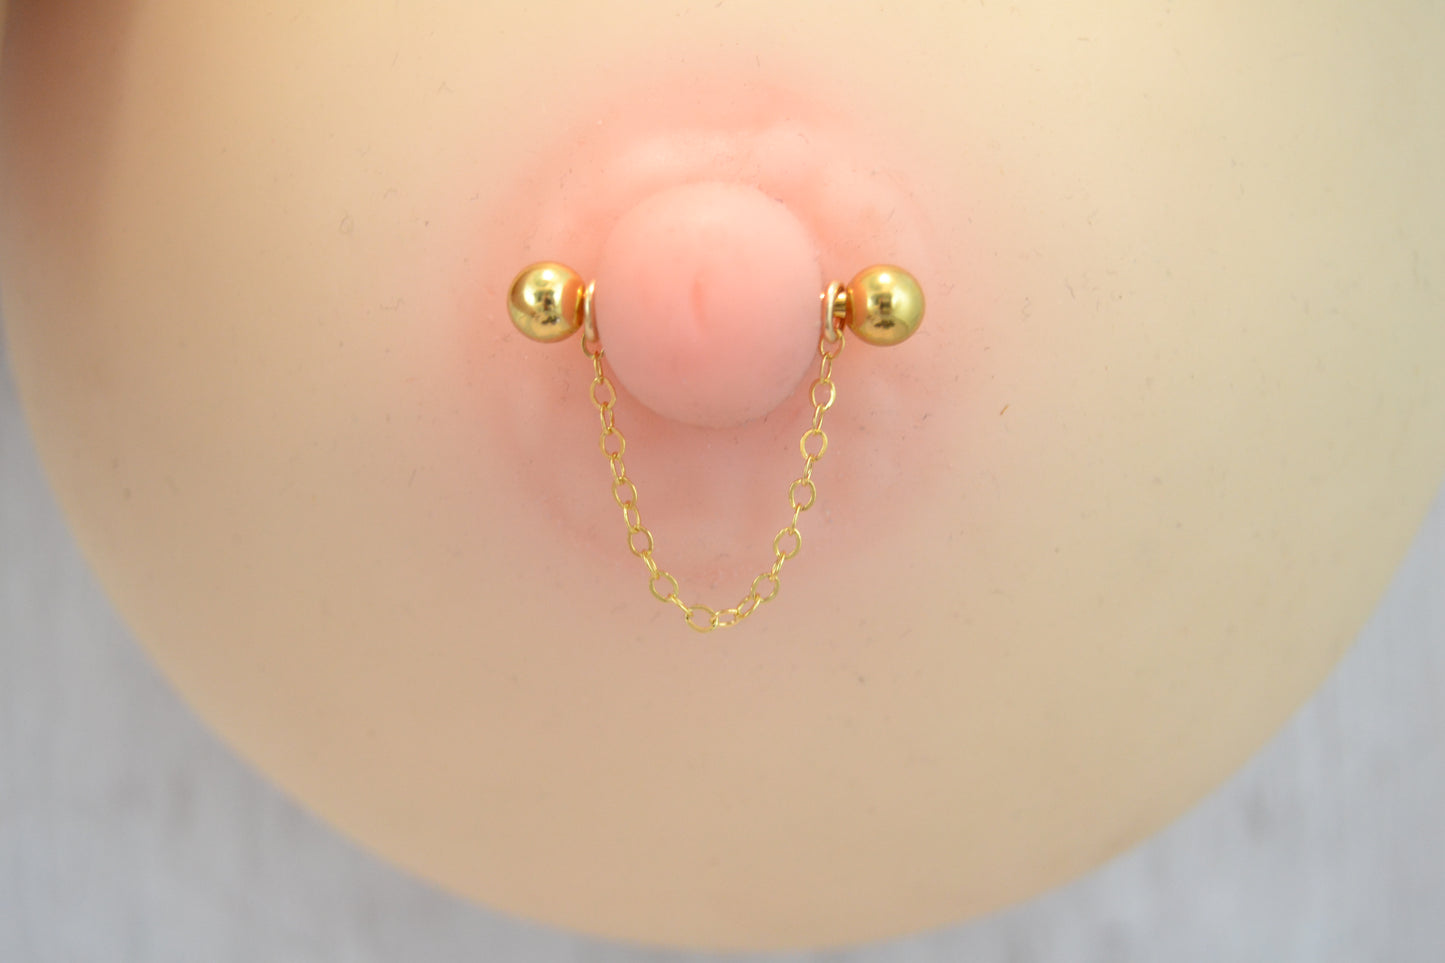 Chain Gold IP 316L Stainless Steel Thin Cable Nipple Ring - 1 pc